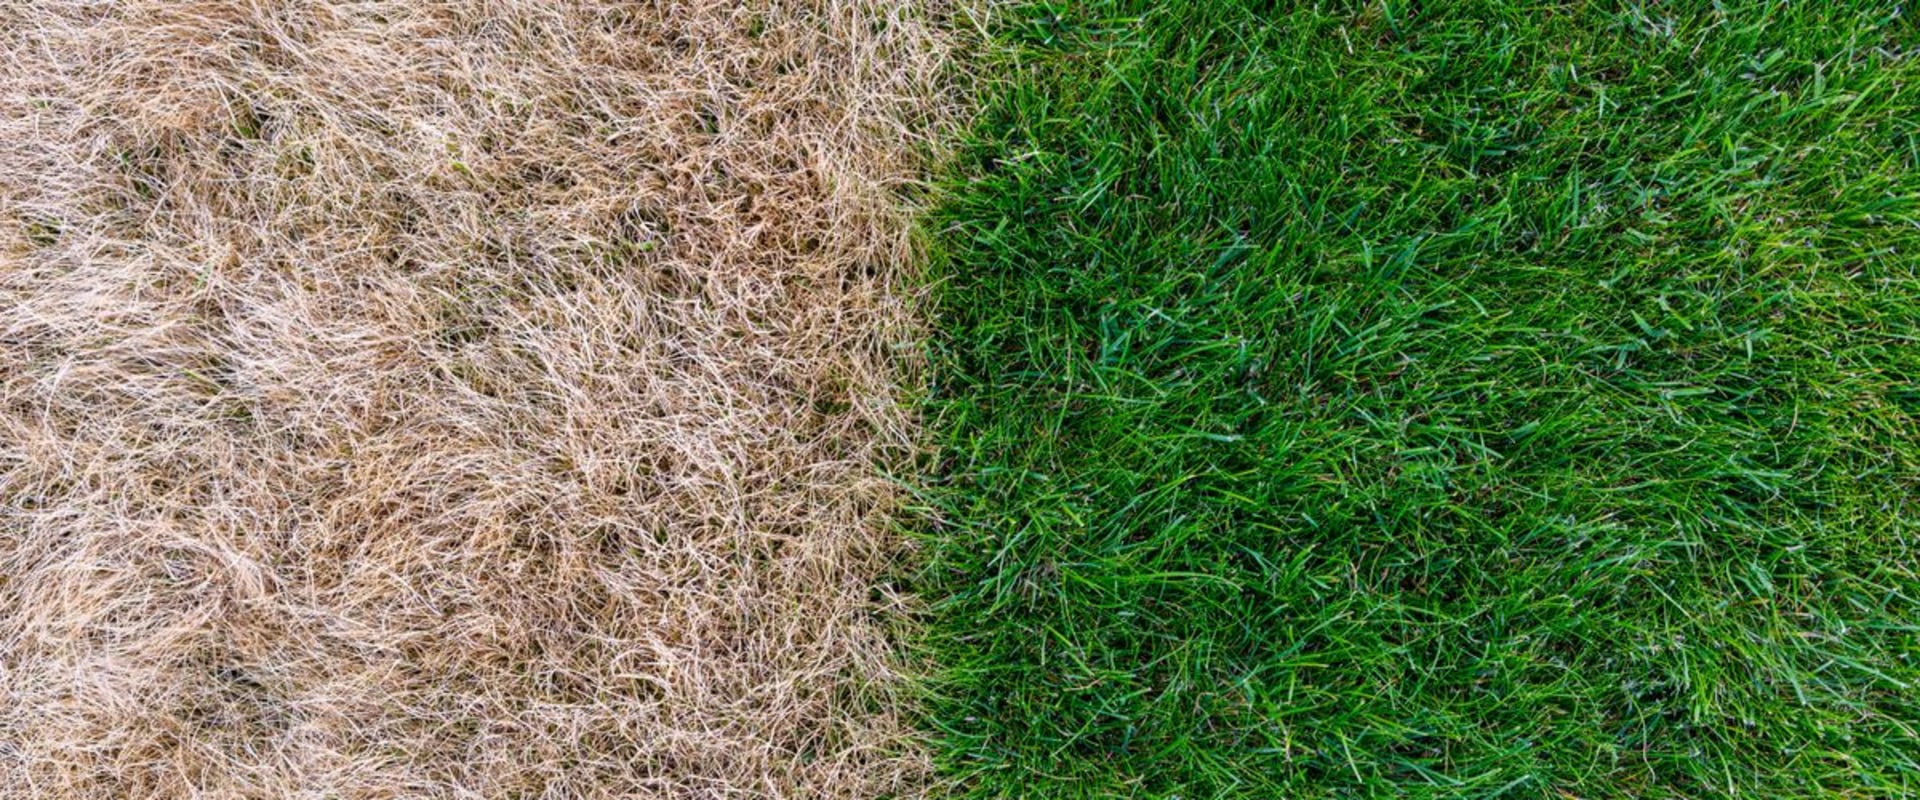 Ditch The Grass Seed For Good: Revive Your Lawn With Synthetic Turf Repair In New Jersey